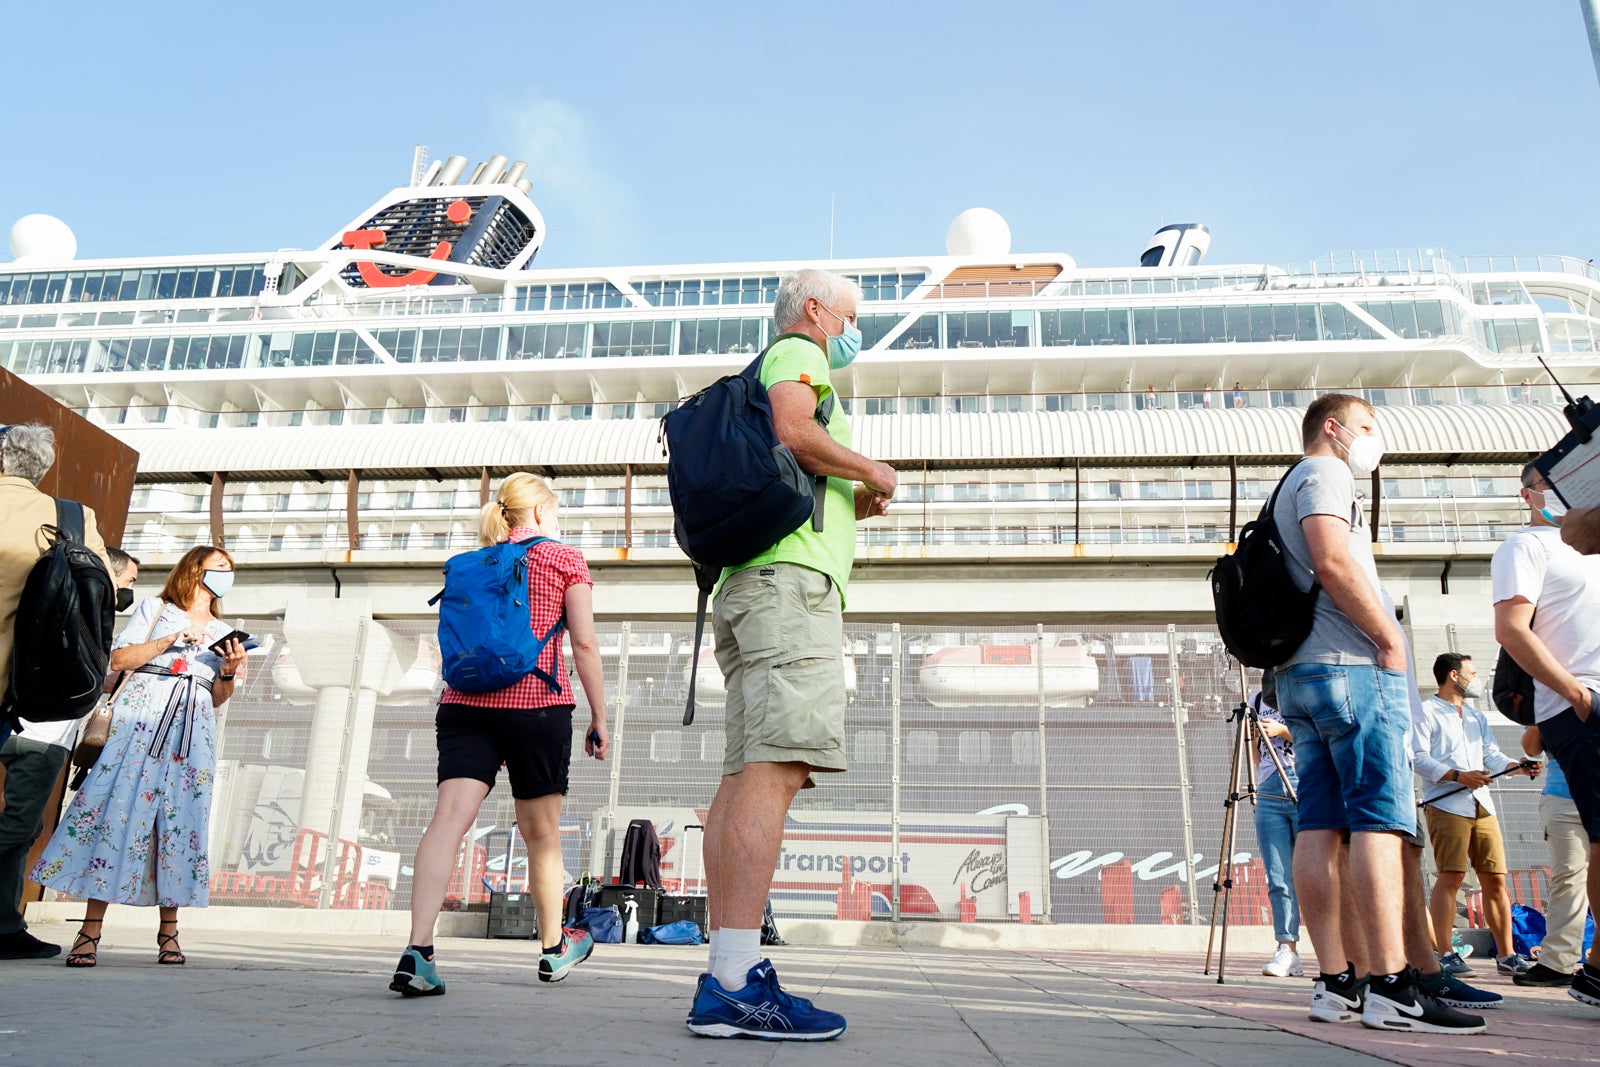 German tourists arrive in Malaga by cruise ship